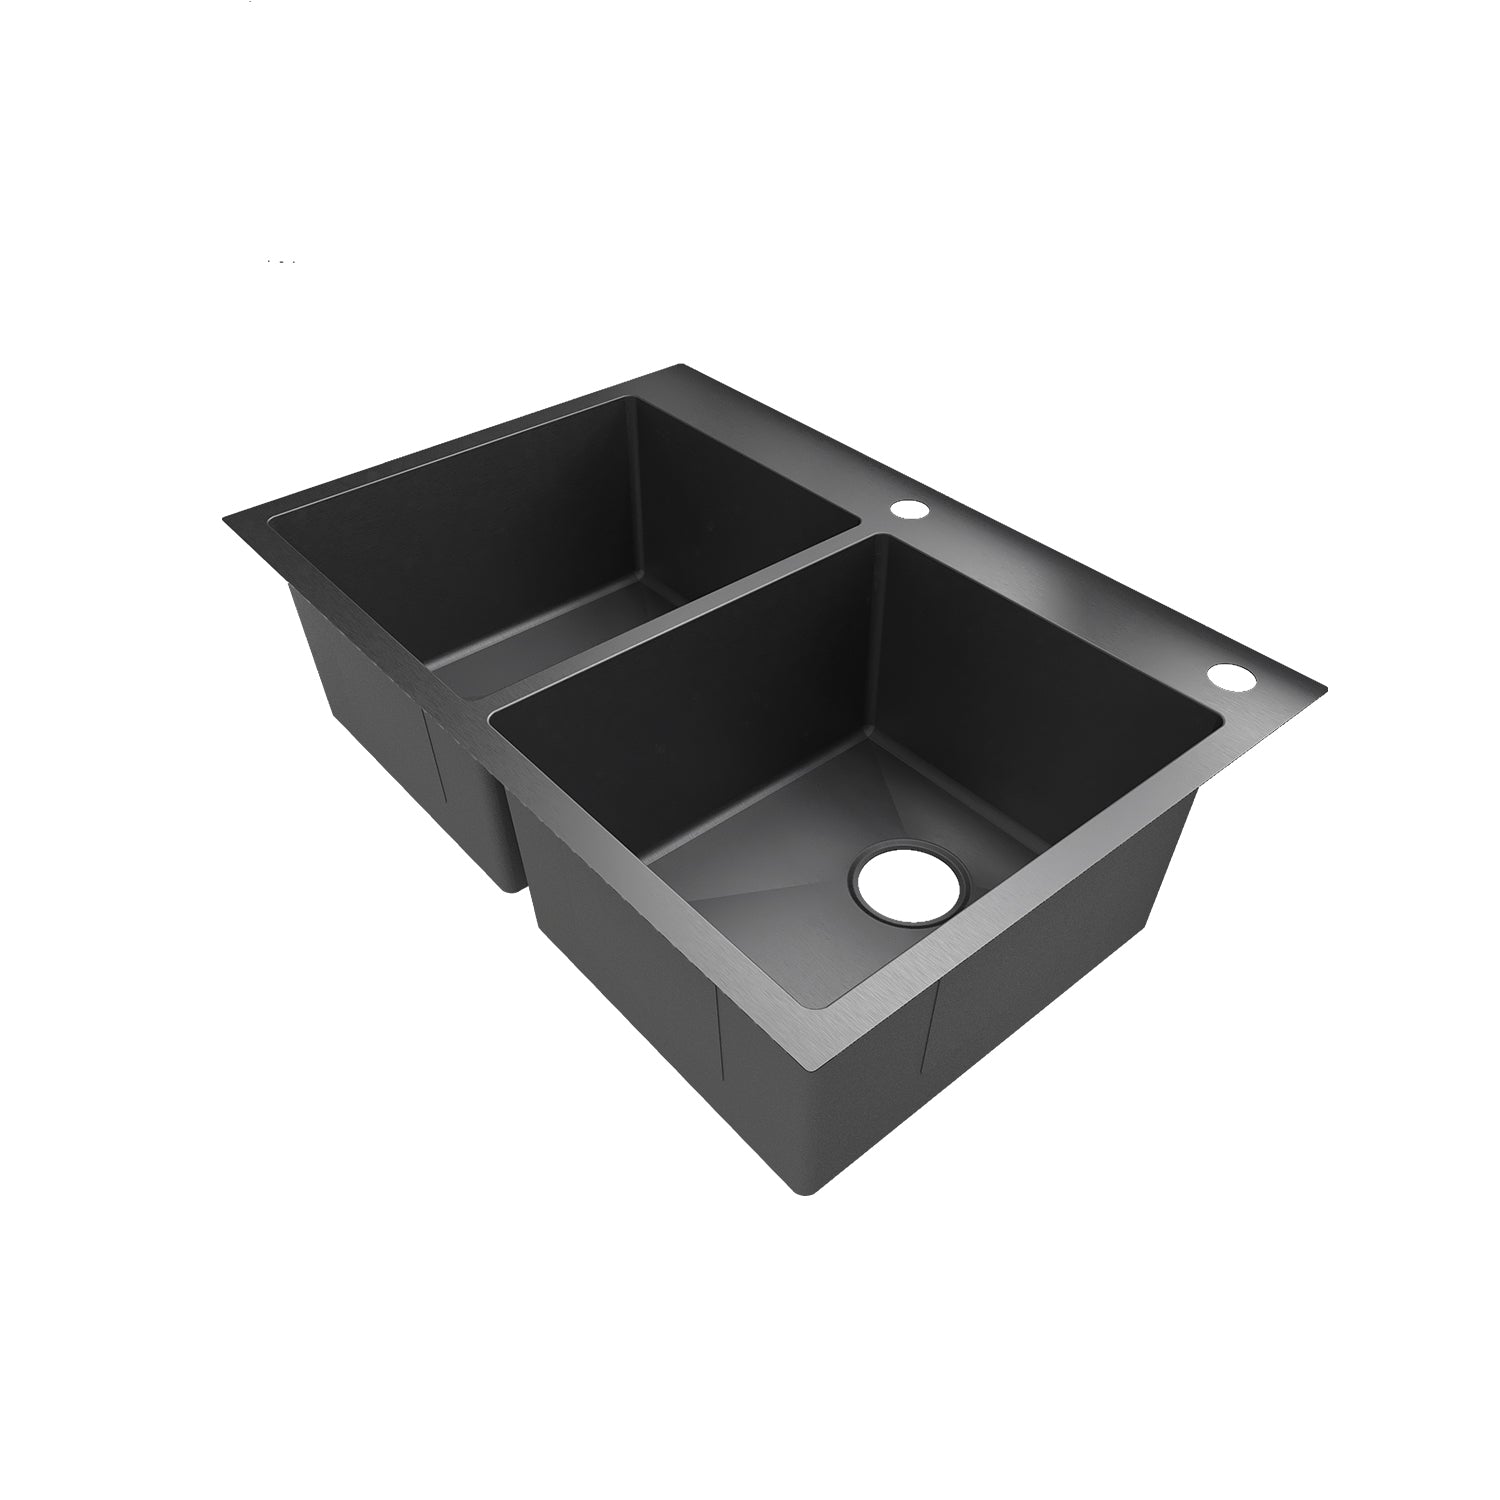 Sinber 33" x 22" x 9" Drop In Double Bowl Kitchen Sink with 18 Gauge 304 Stainless Steel Black Finish HT3322D-B (Sink Only)